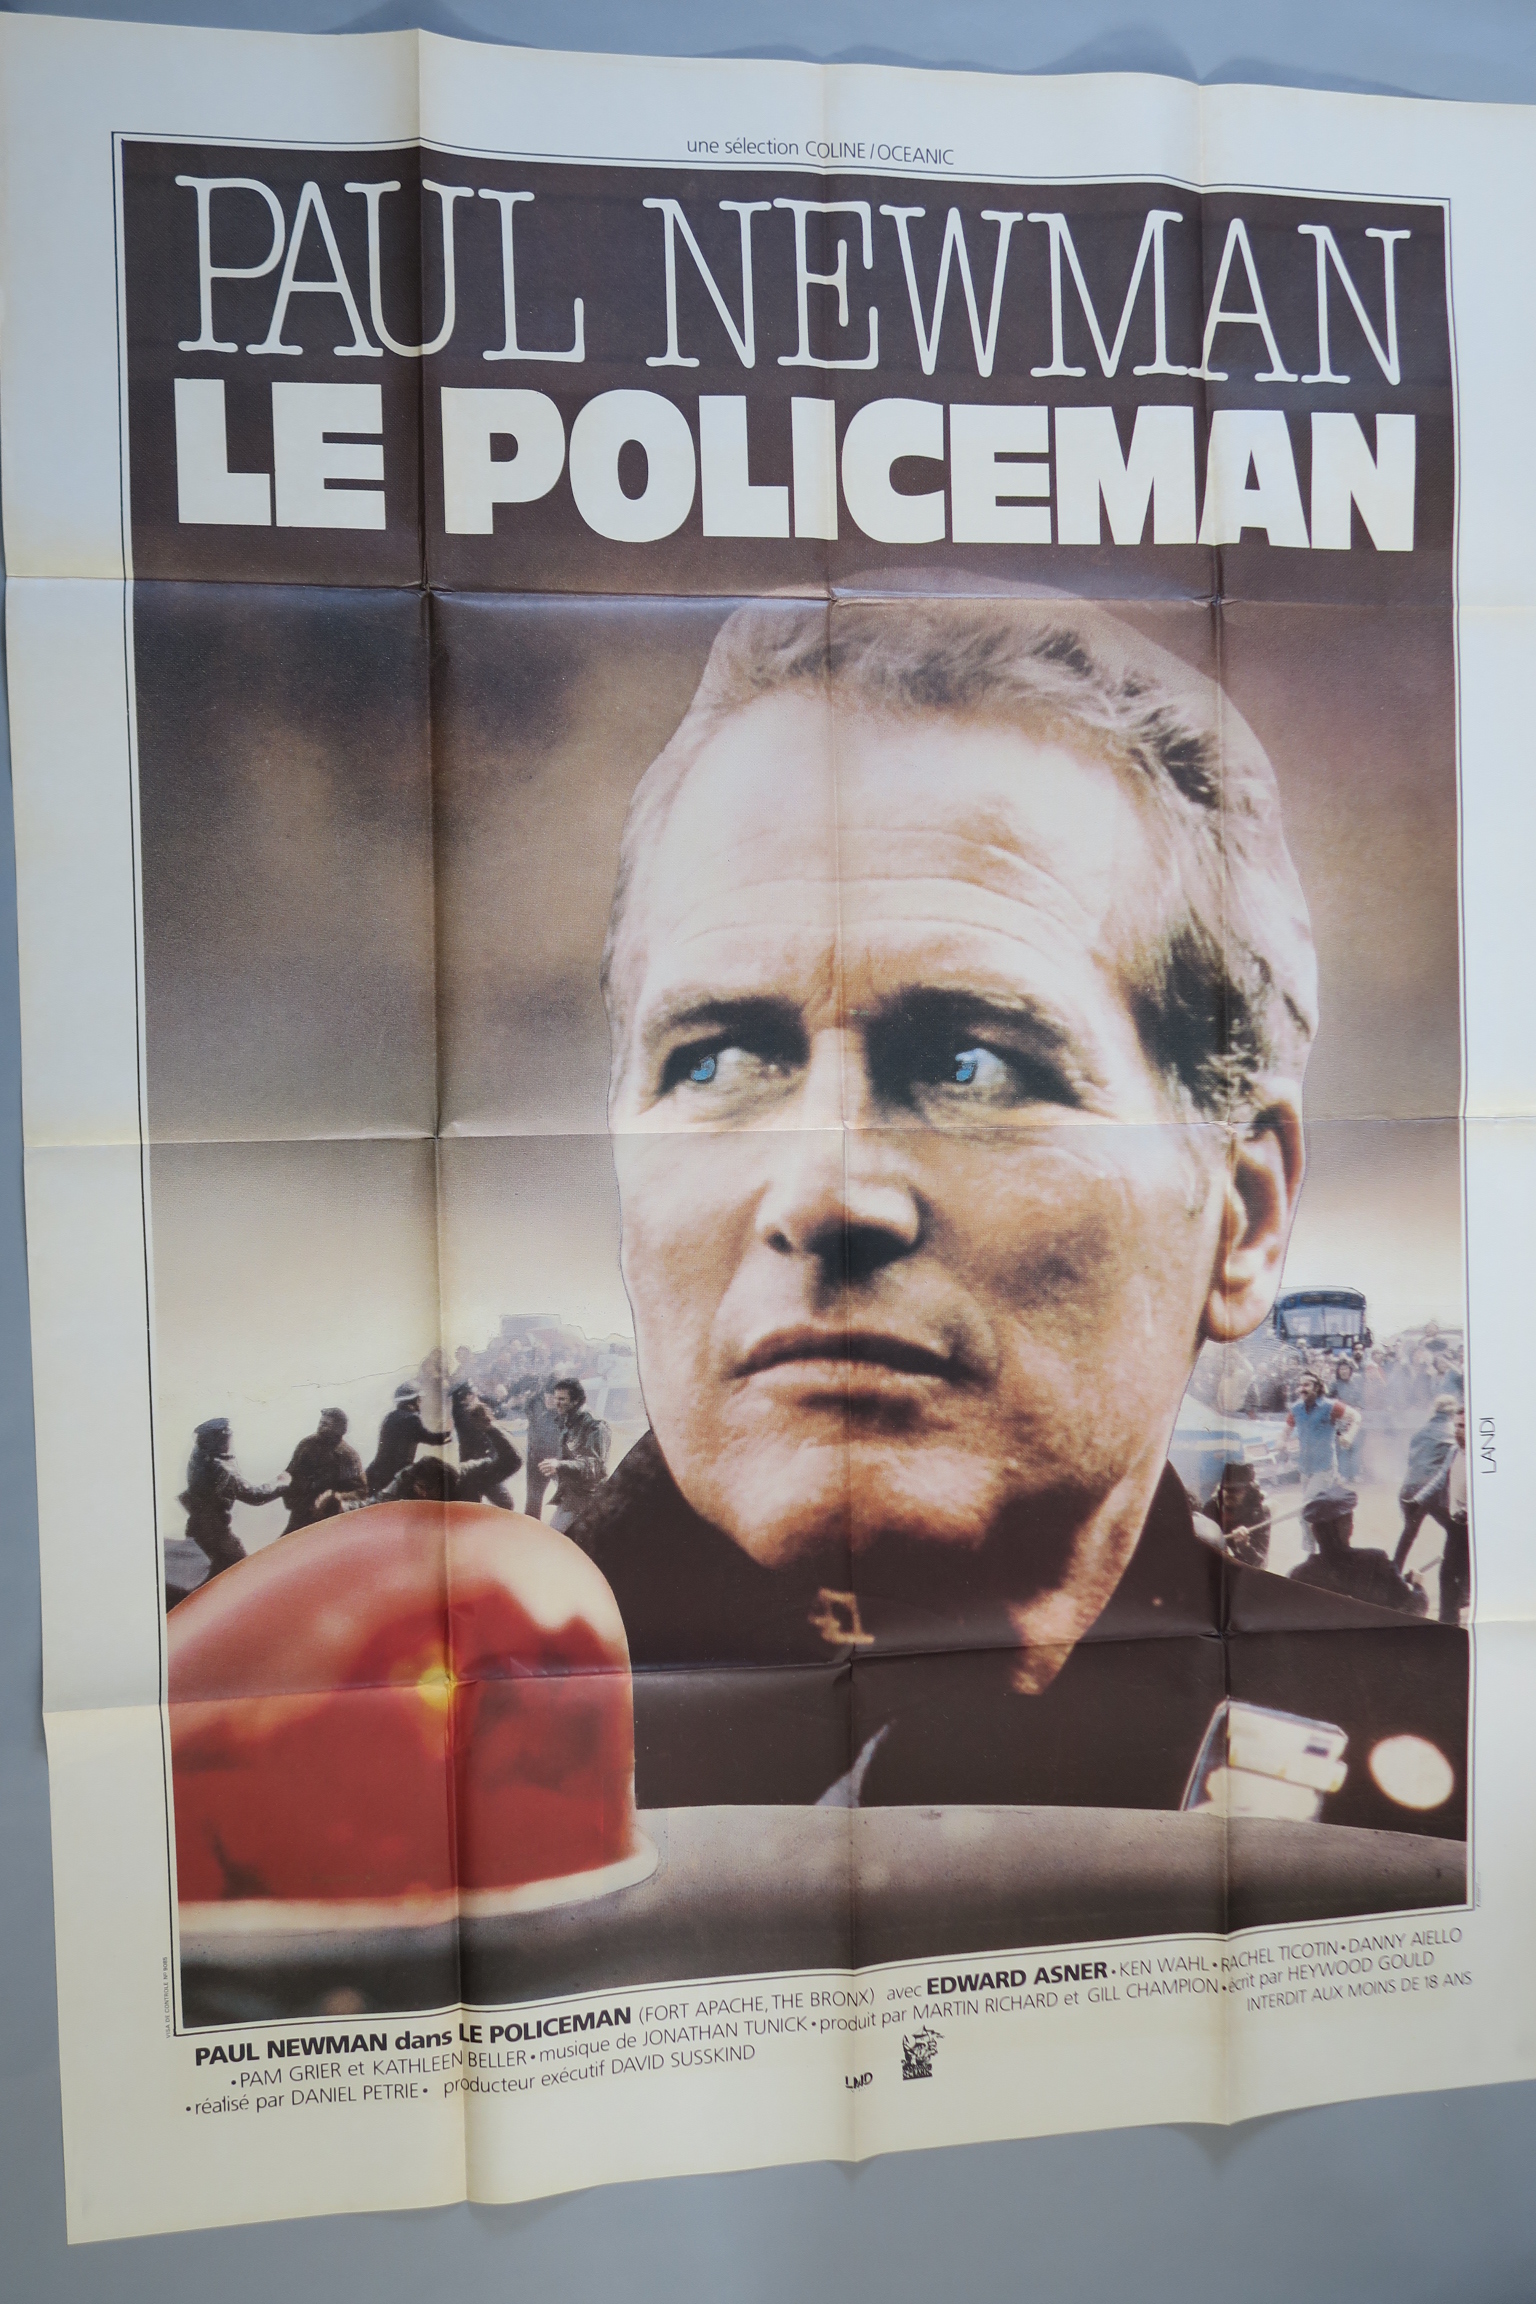 French Grande film posters to include; "Le Souteneur" with scooter art in French street scene, - Image 6 of 6